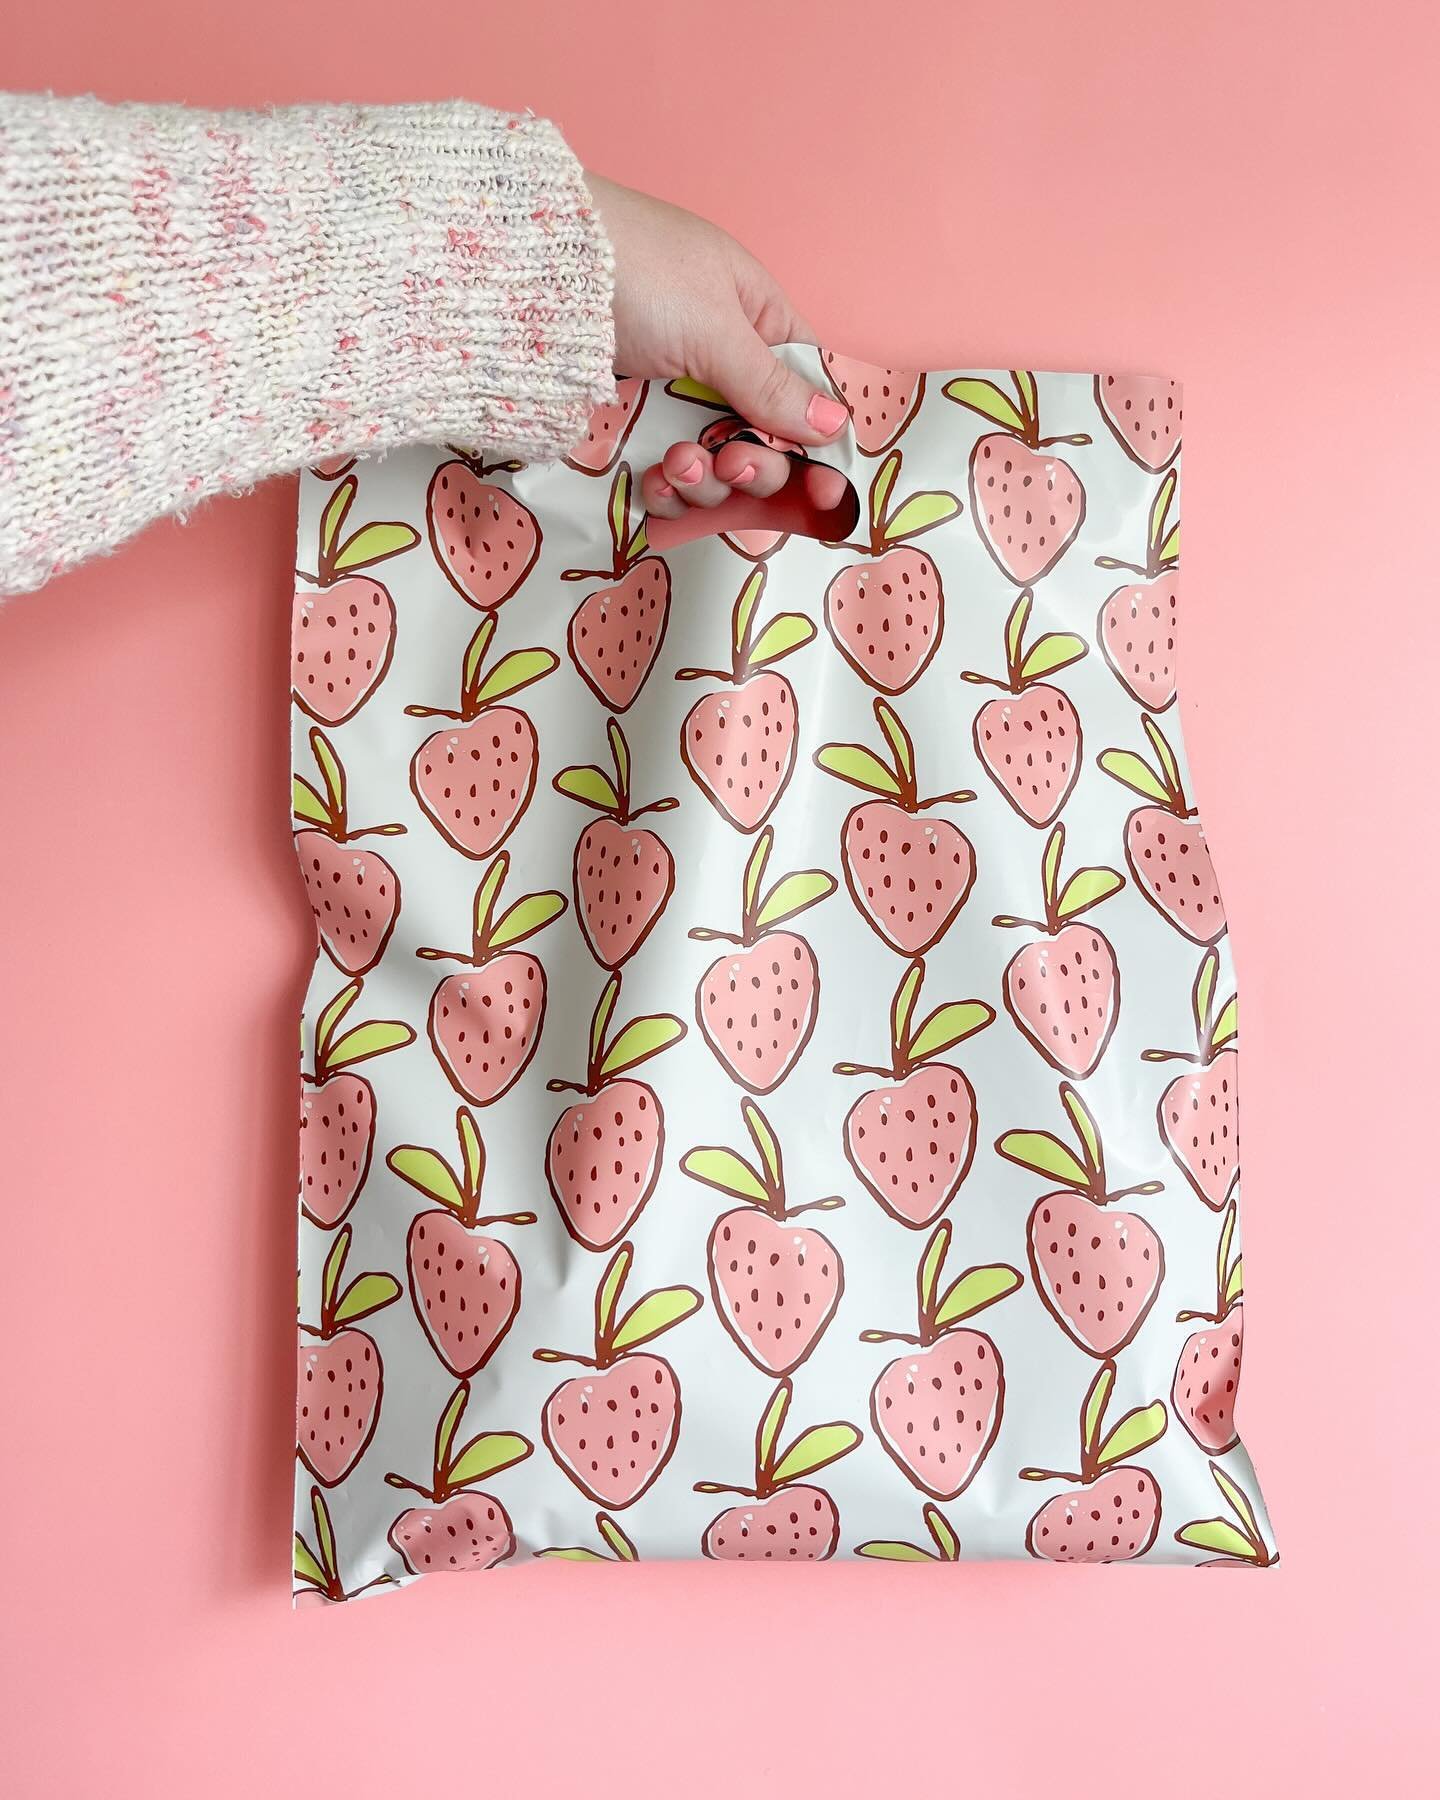 Our two new merchandise bags will be available TOMORROW at 11am est along with our summer collection of mailers &amp; insert cards!🍓🎀 These shopping bags are perfect for pop up events, markets, retail shops &amp; more! We&rsquo;ve had lots of reque